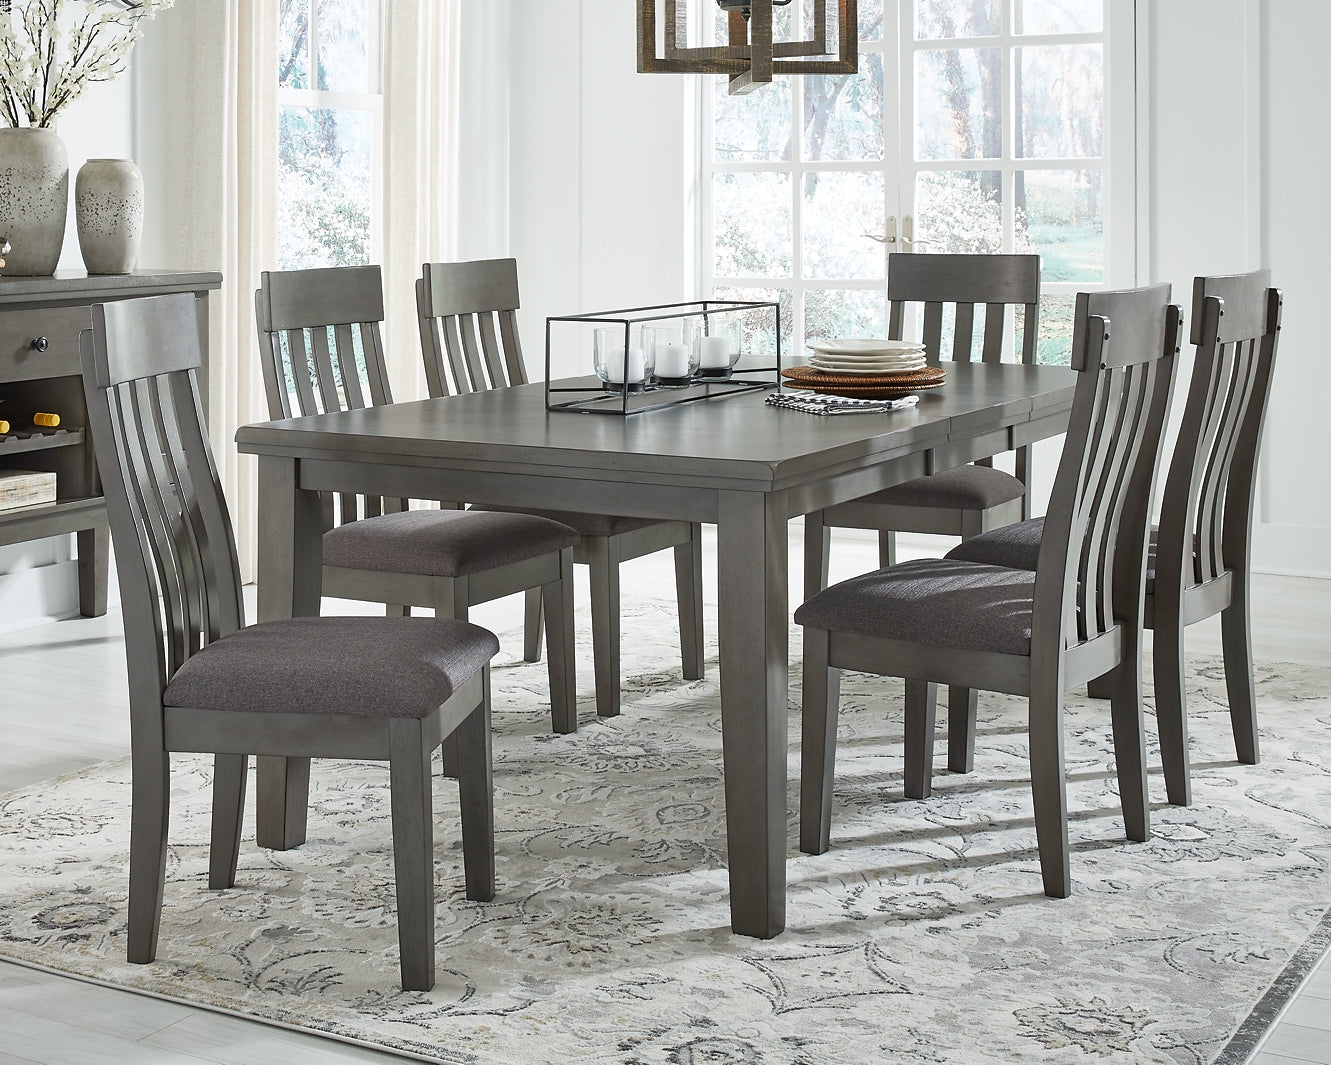 Hallanden Dining Table and 6 Chairs at Walker Mattress and Furniture Locations in Cedar Park and Belton TX.